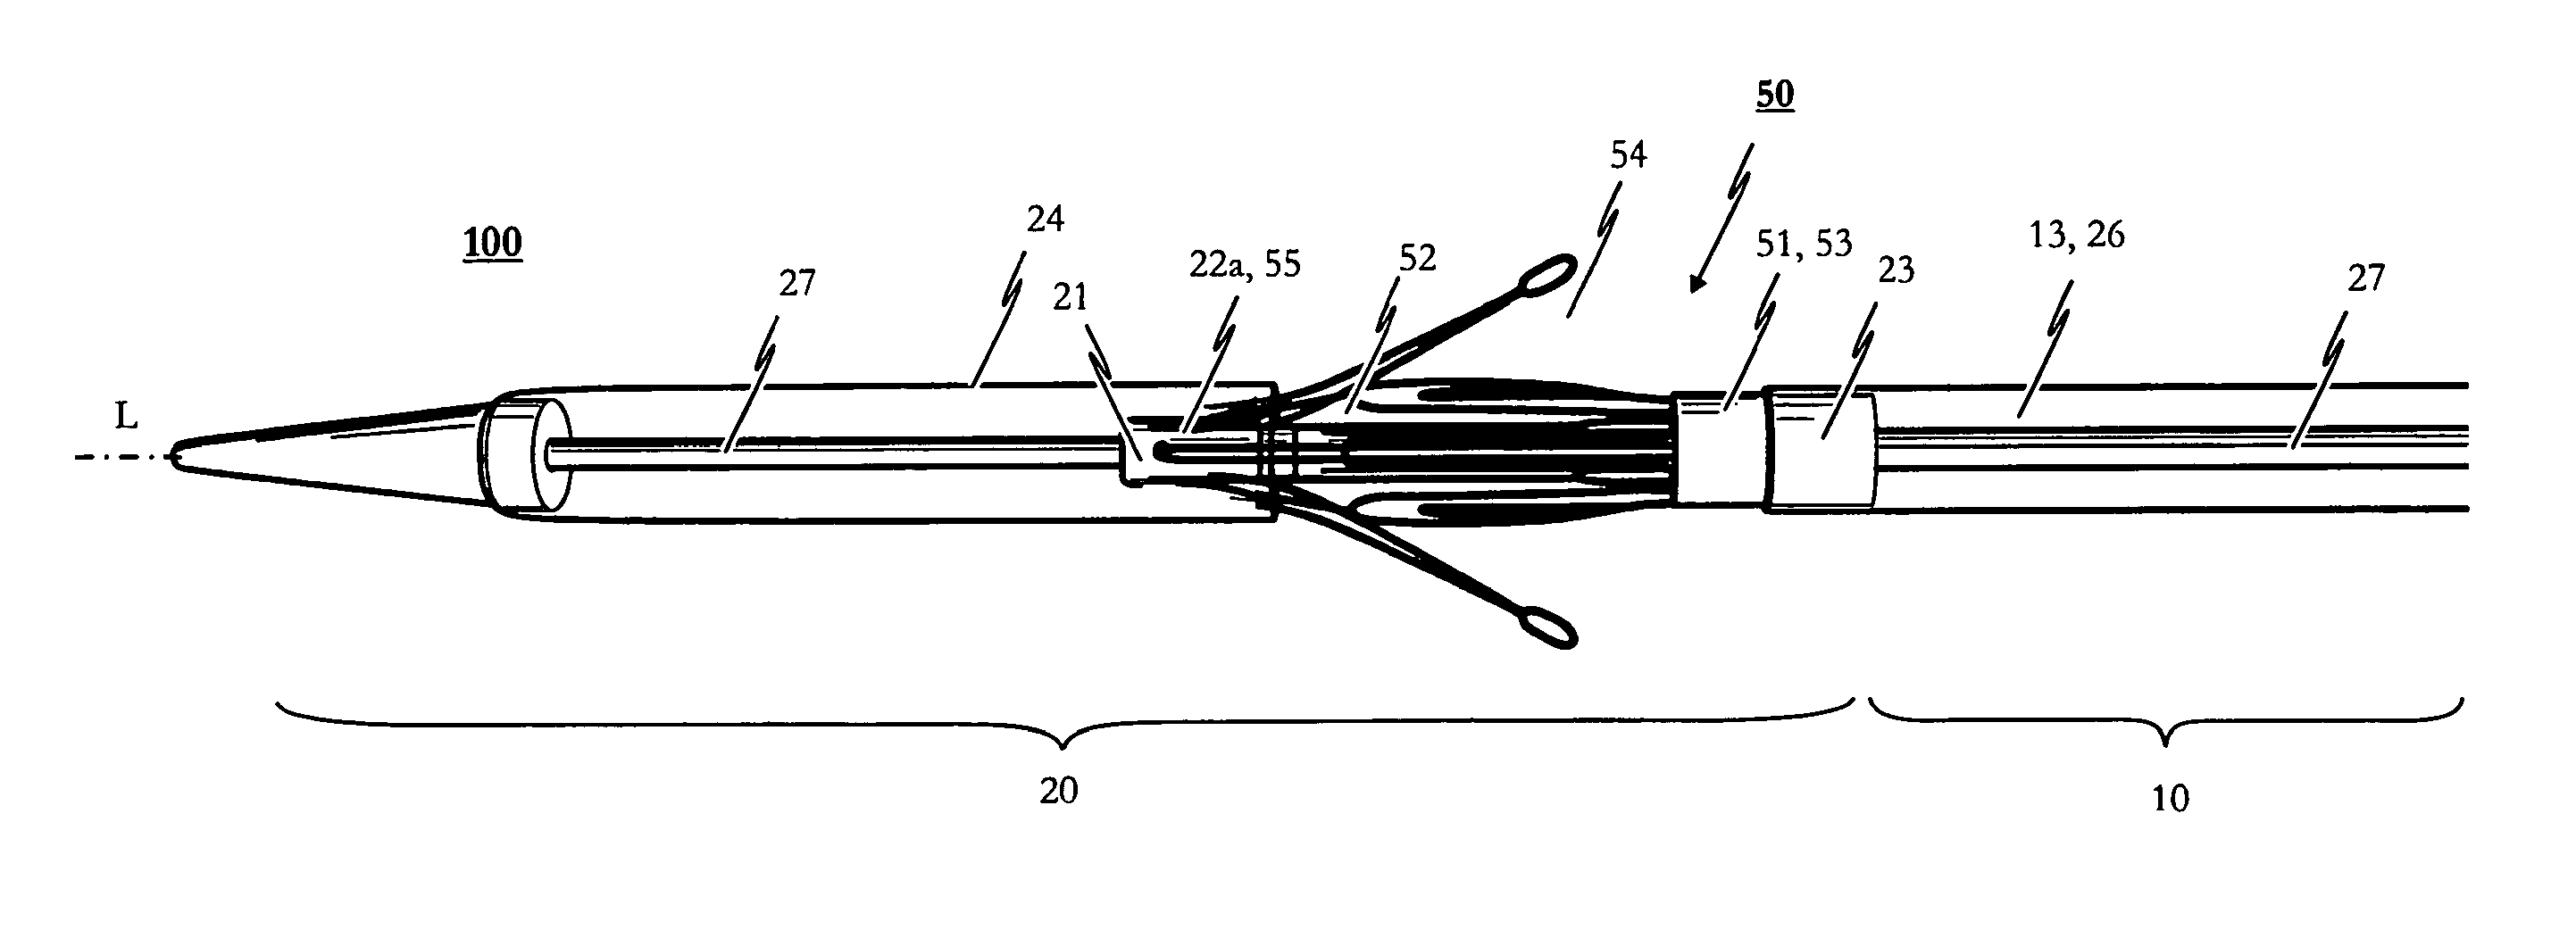 Medical device for treating a heart valve insufficiency or stenosis